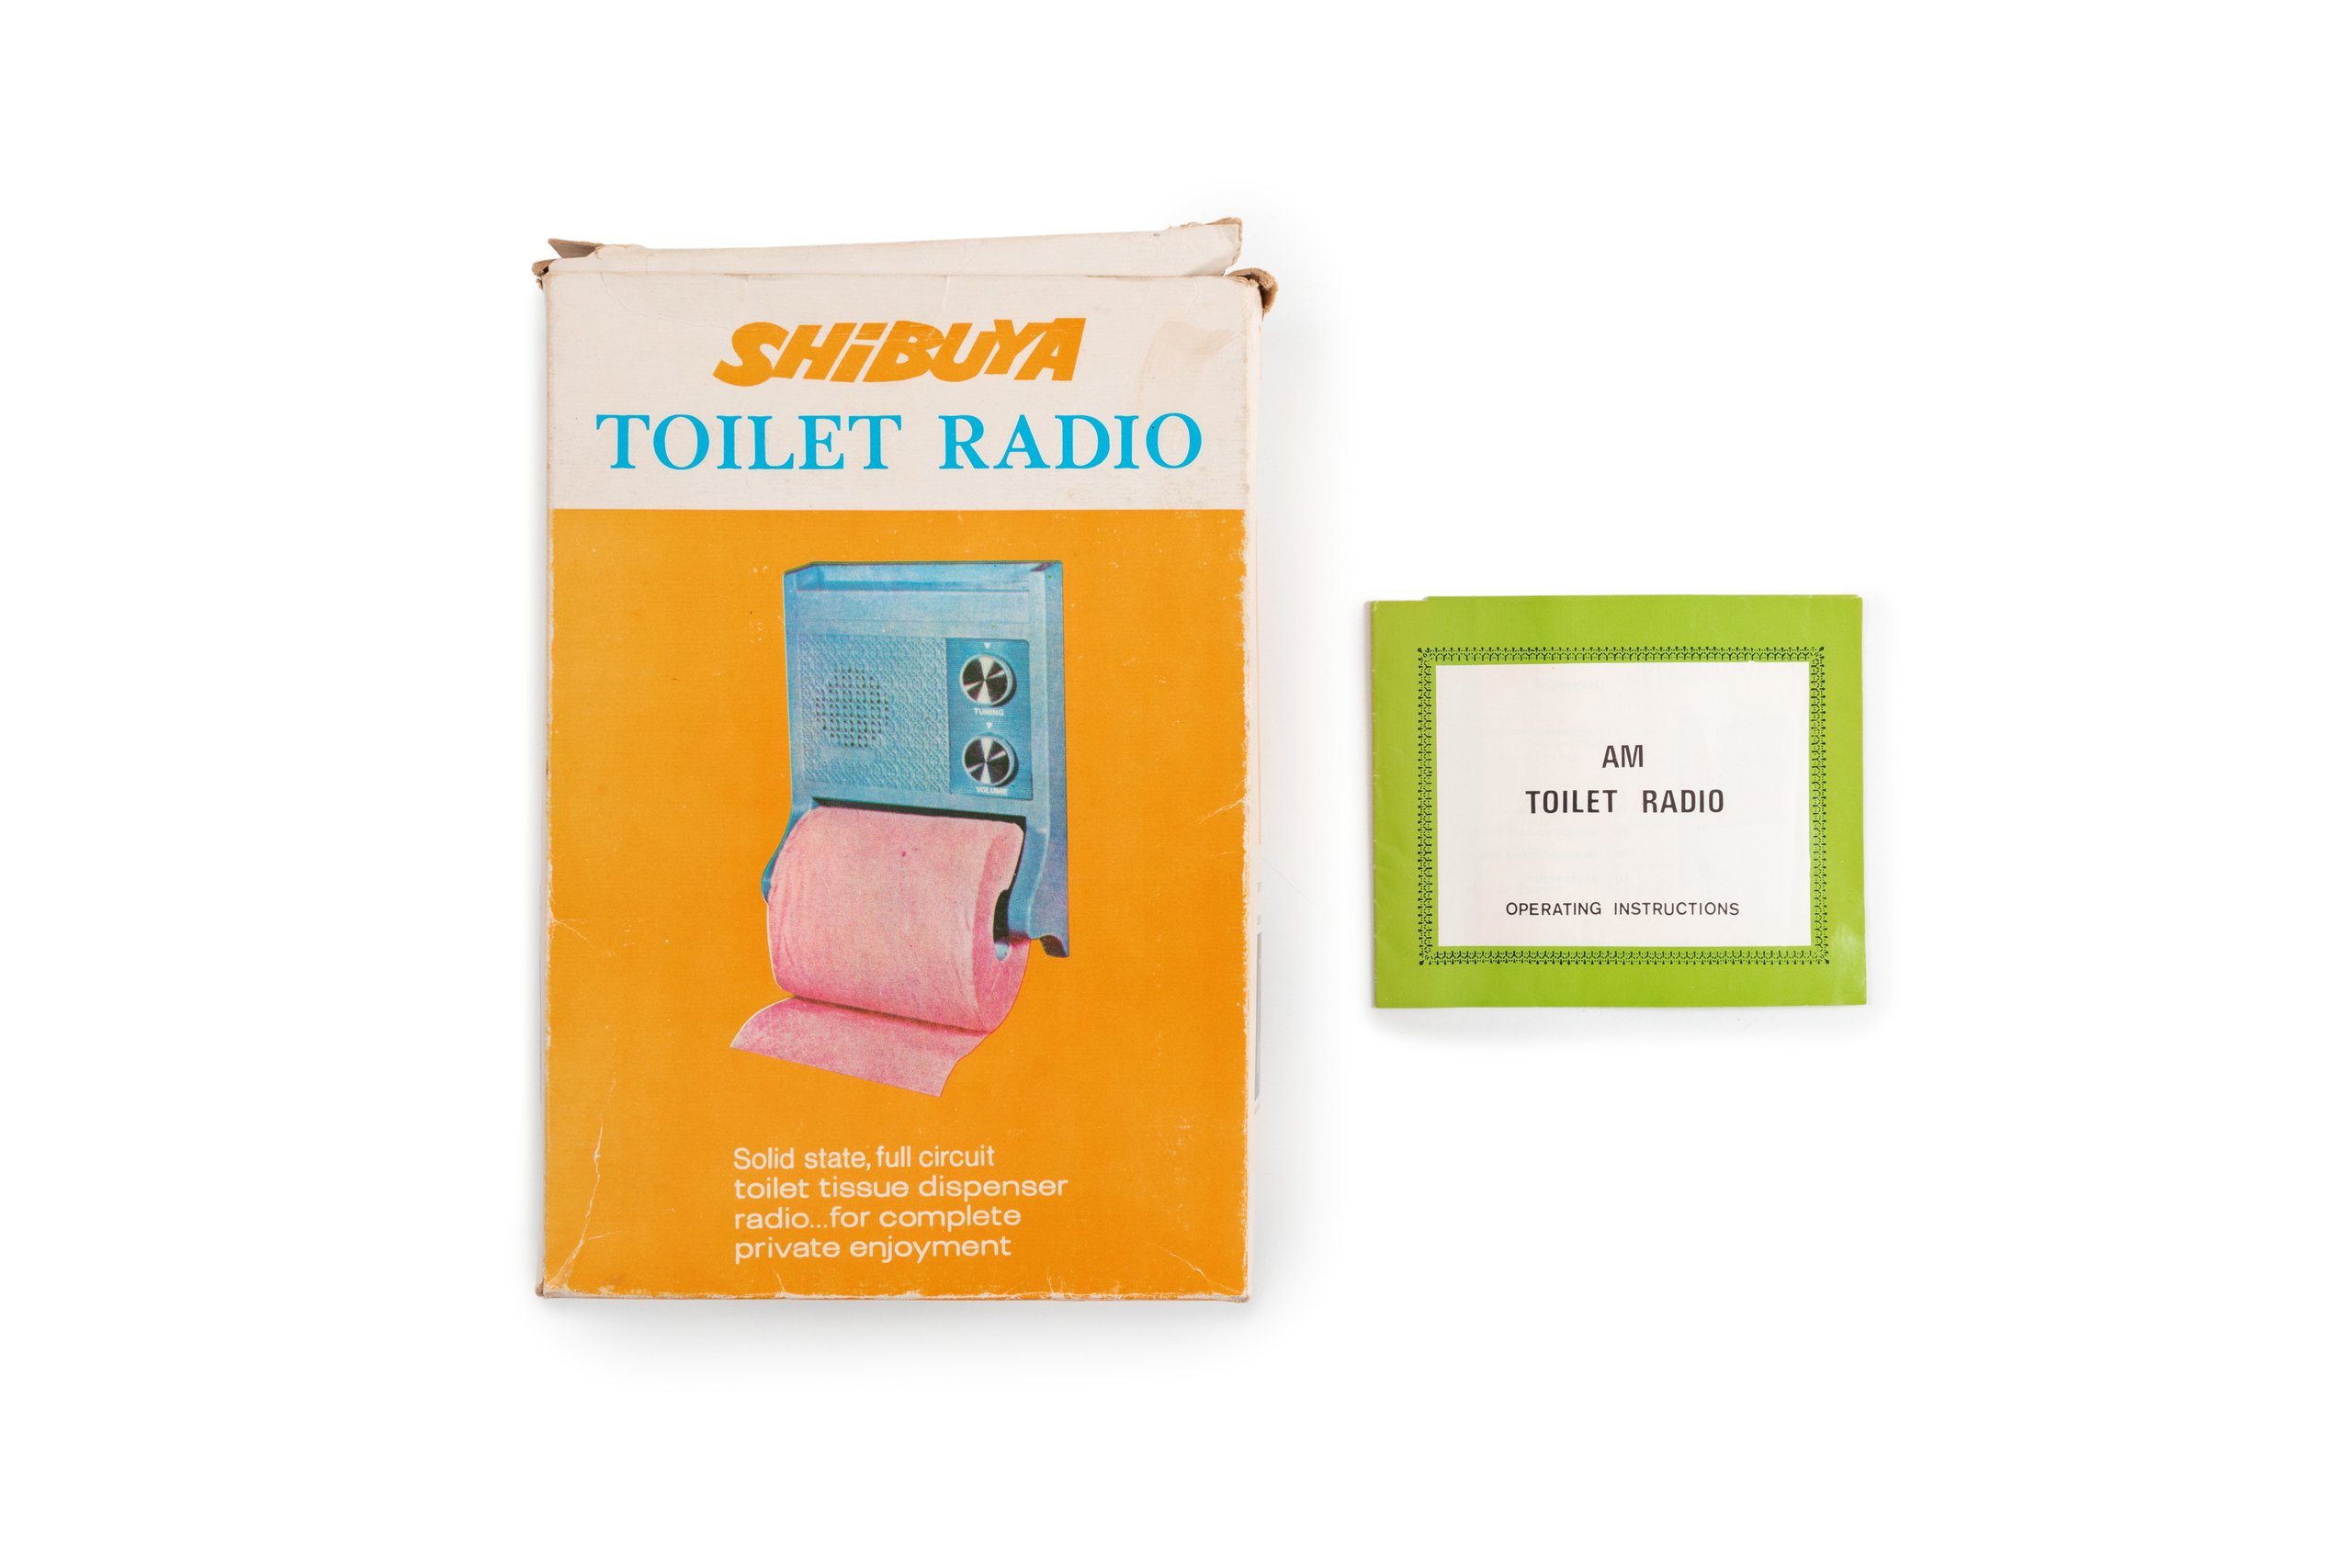 Radio with toilet roll holder